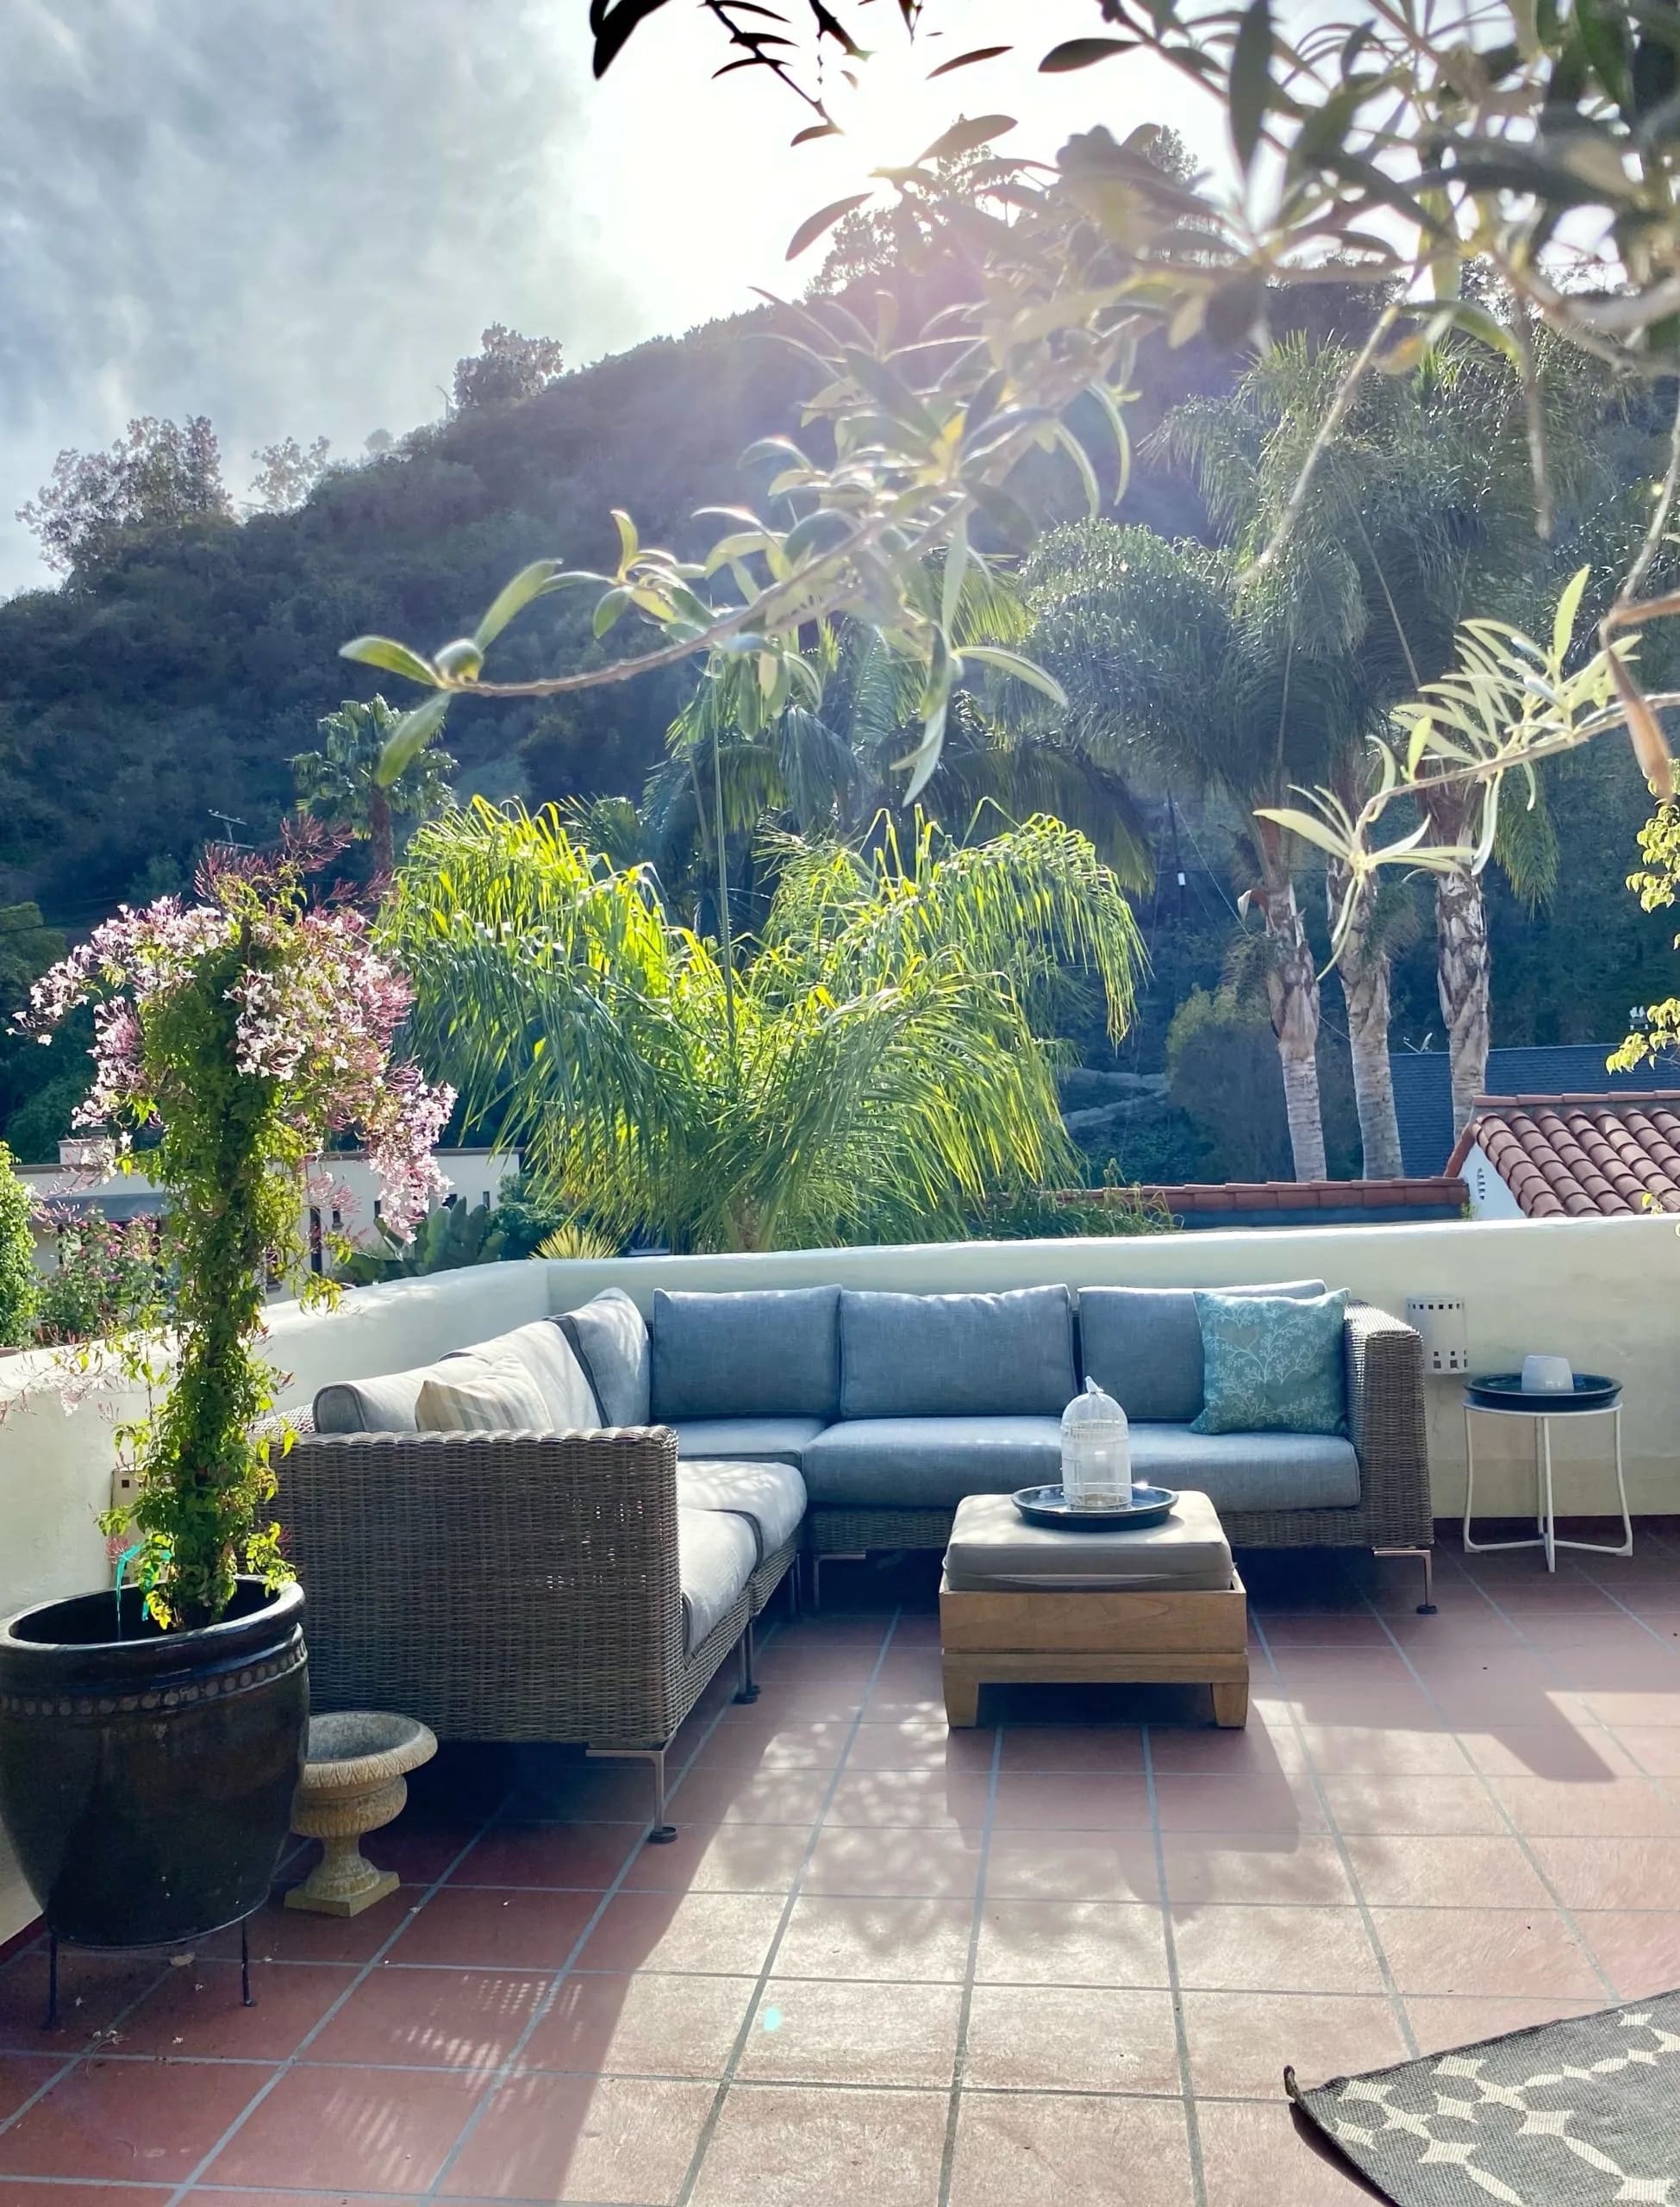 Get Inspired: My Outdoor Patio is All About Outer